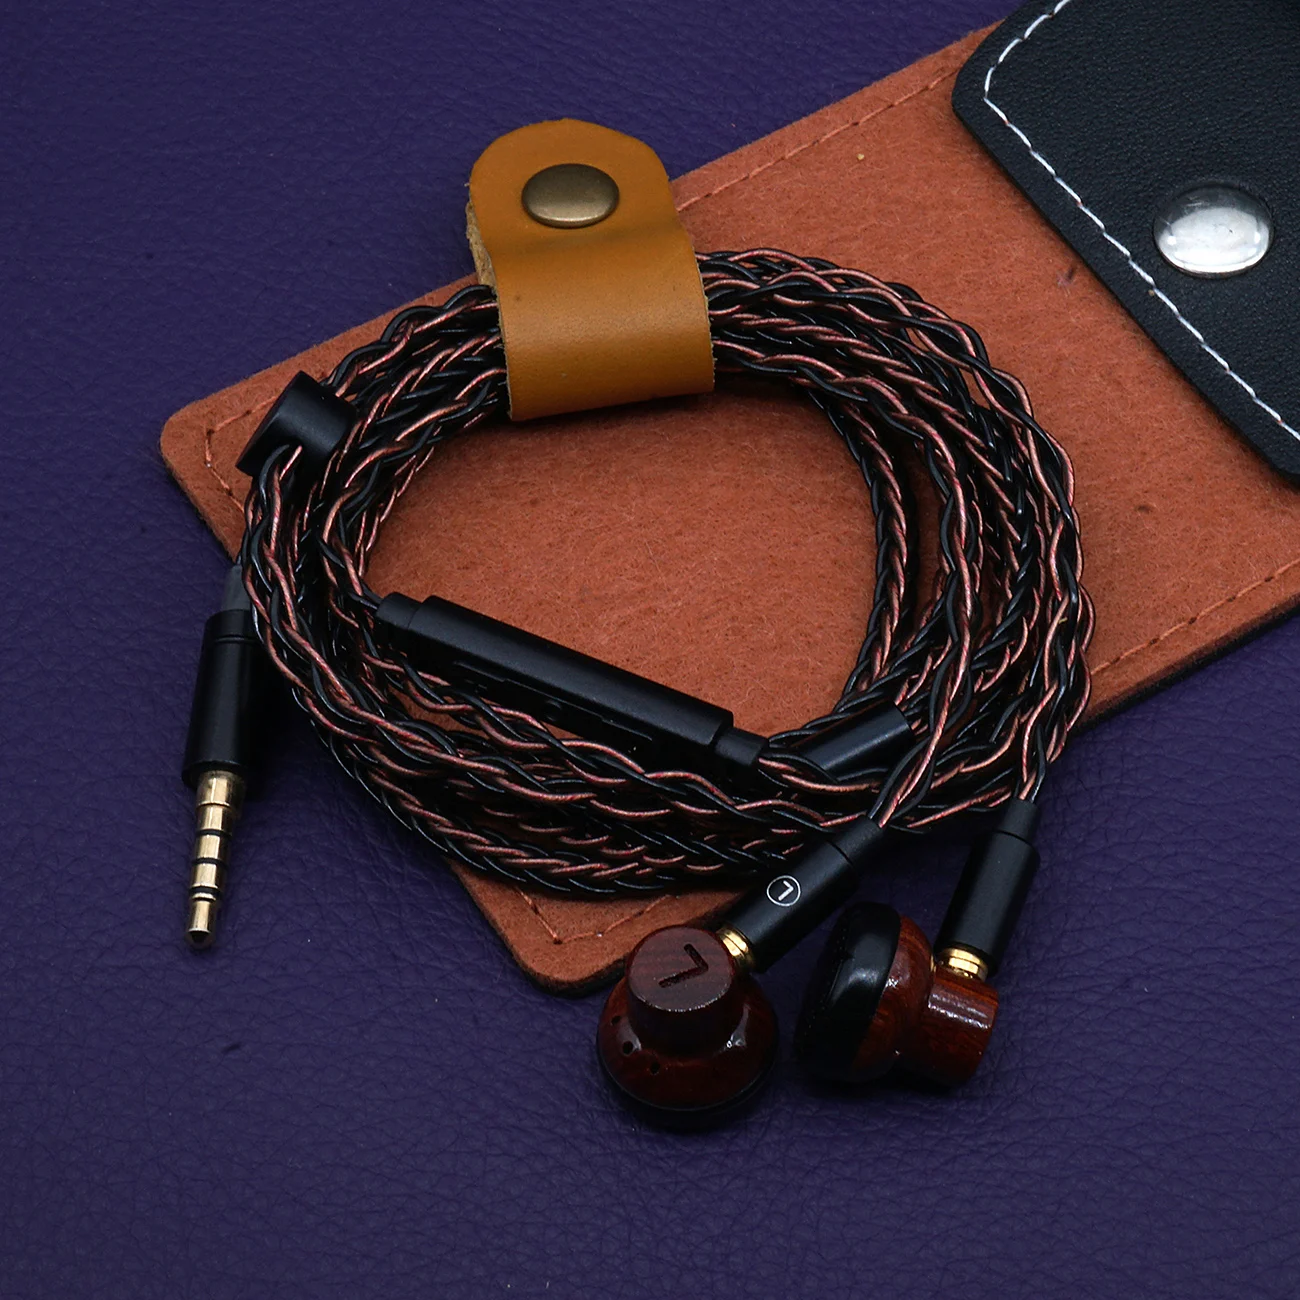 

TMUSIC MO1 HiFi Earphone Smooth Analog Juicy Sound Solidwood Housing Wired Customized Flat Head Headset 8 Strands MMCX Cable